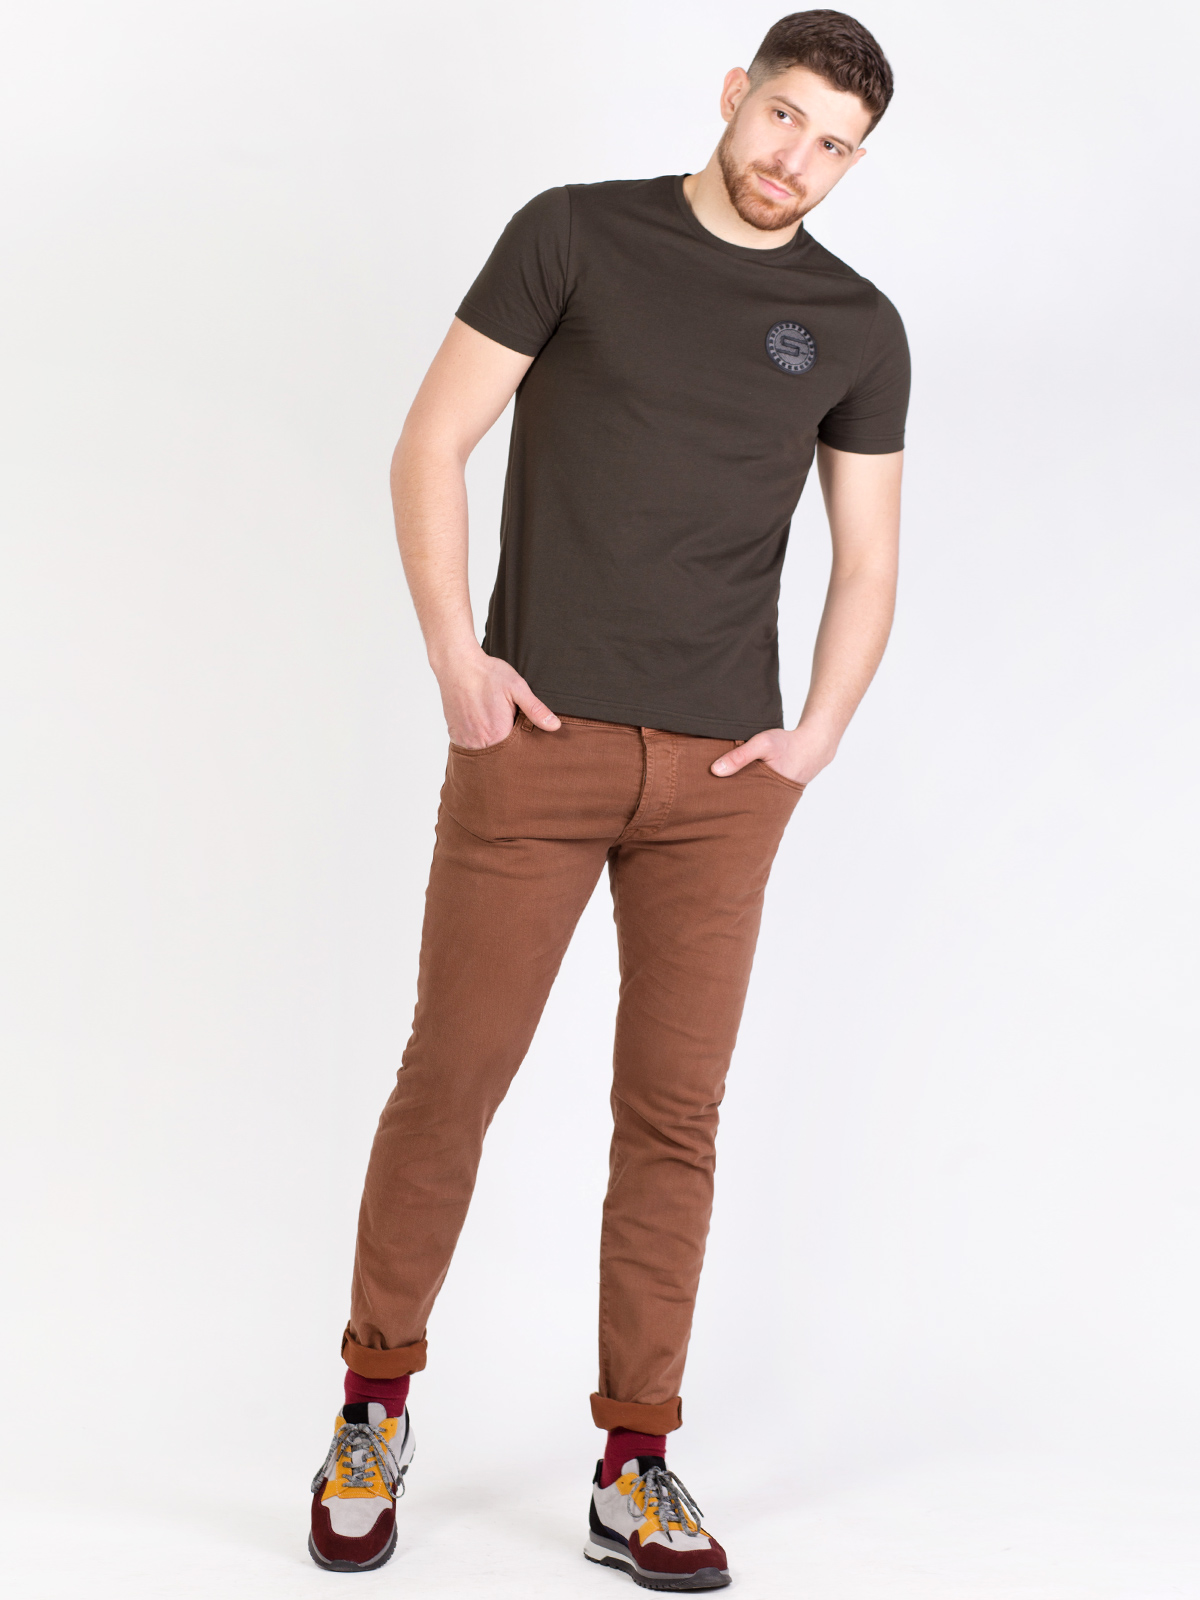 Sports jeans in camel color - 62154 € 44.43 img2